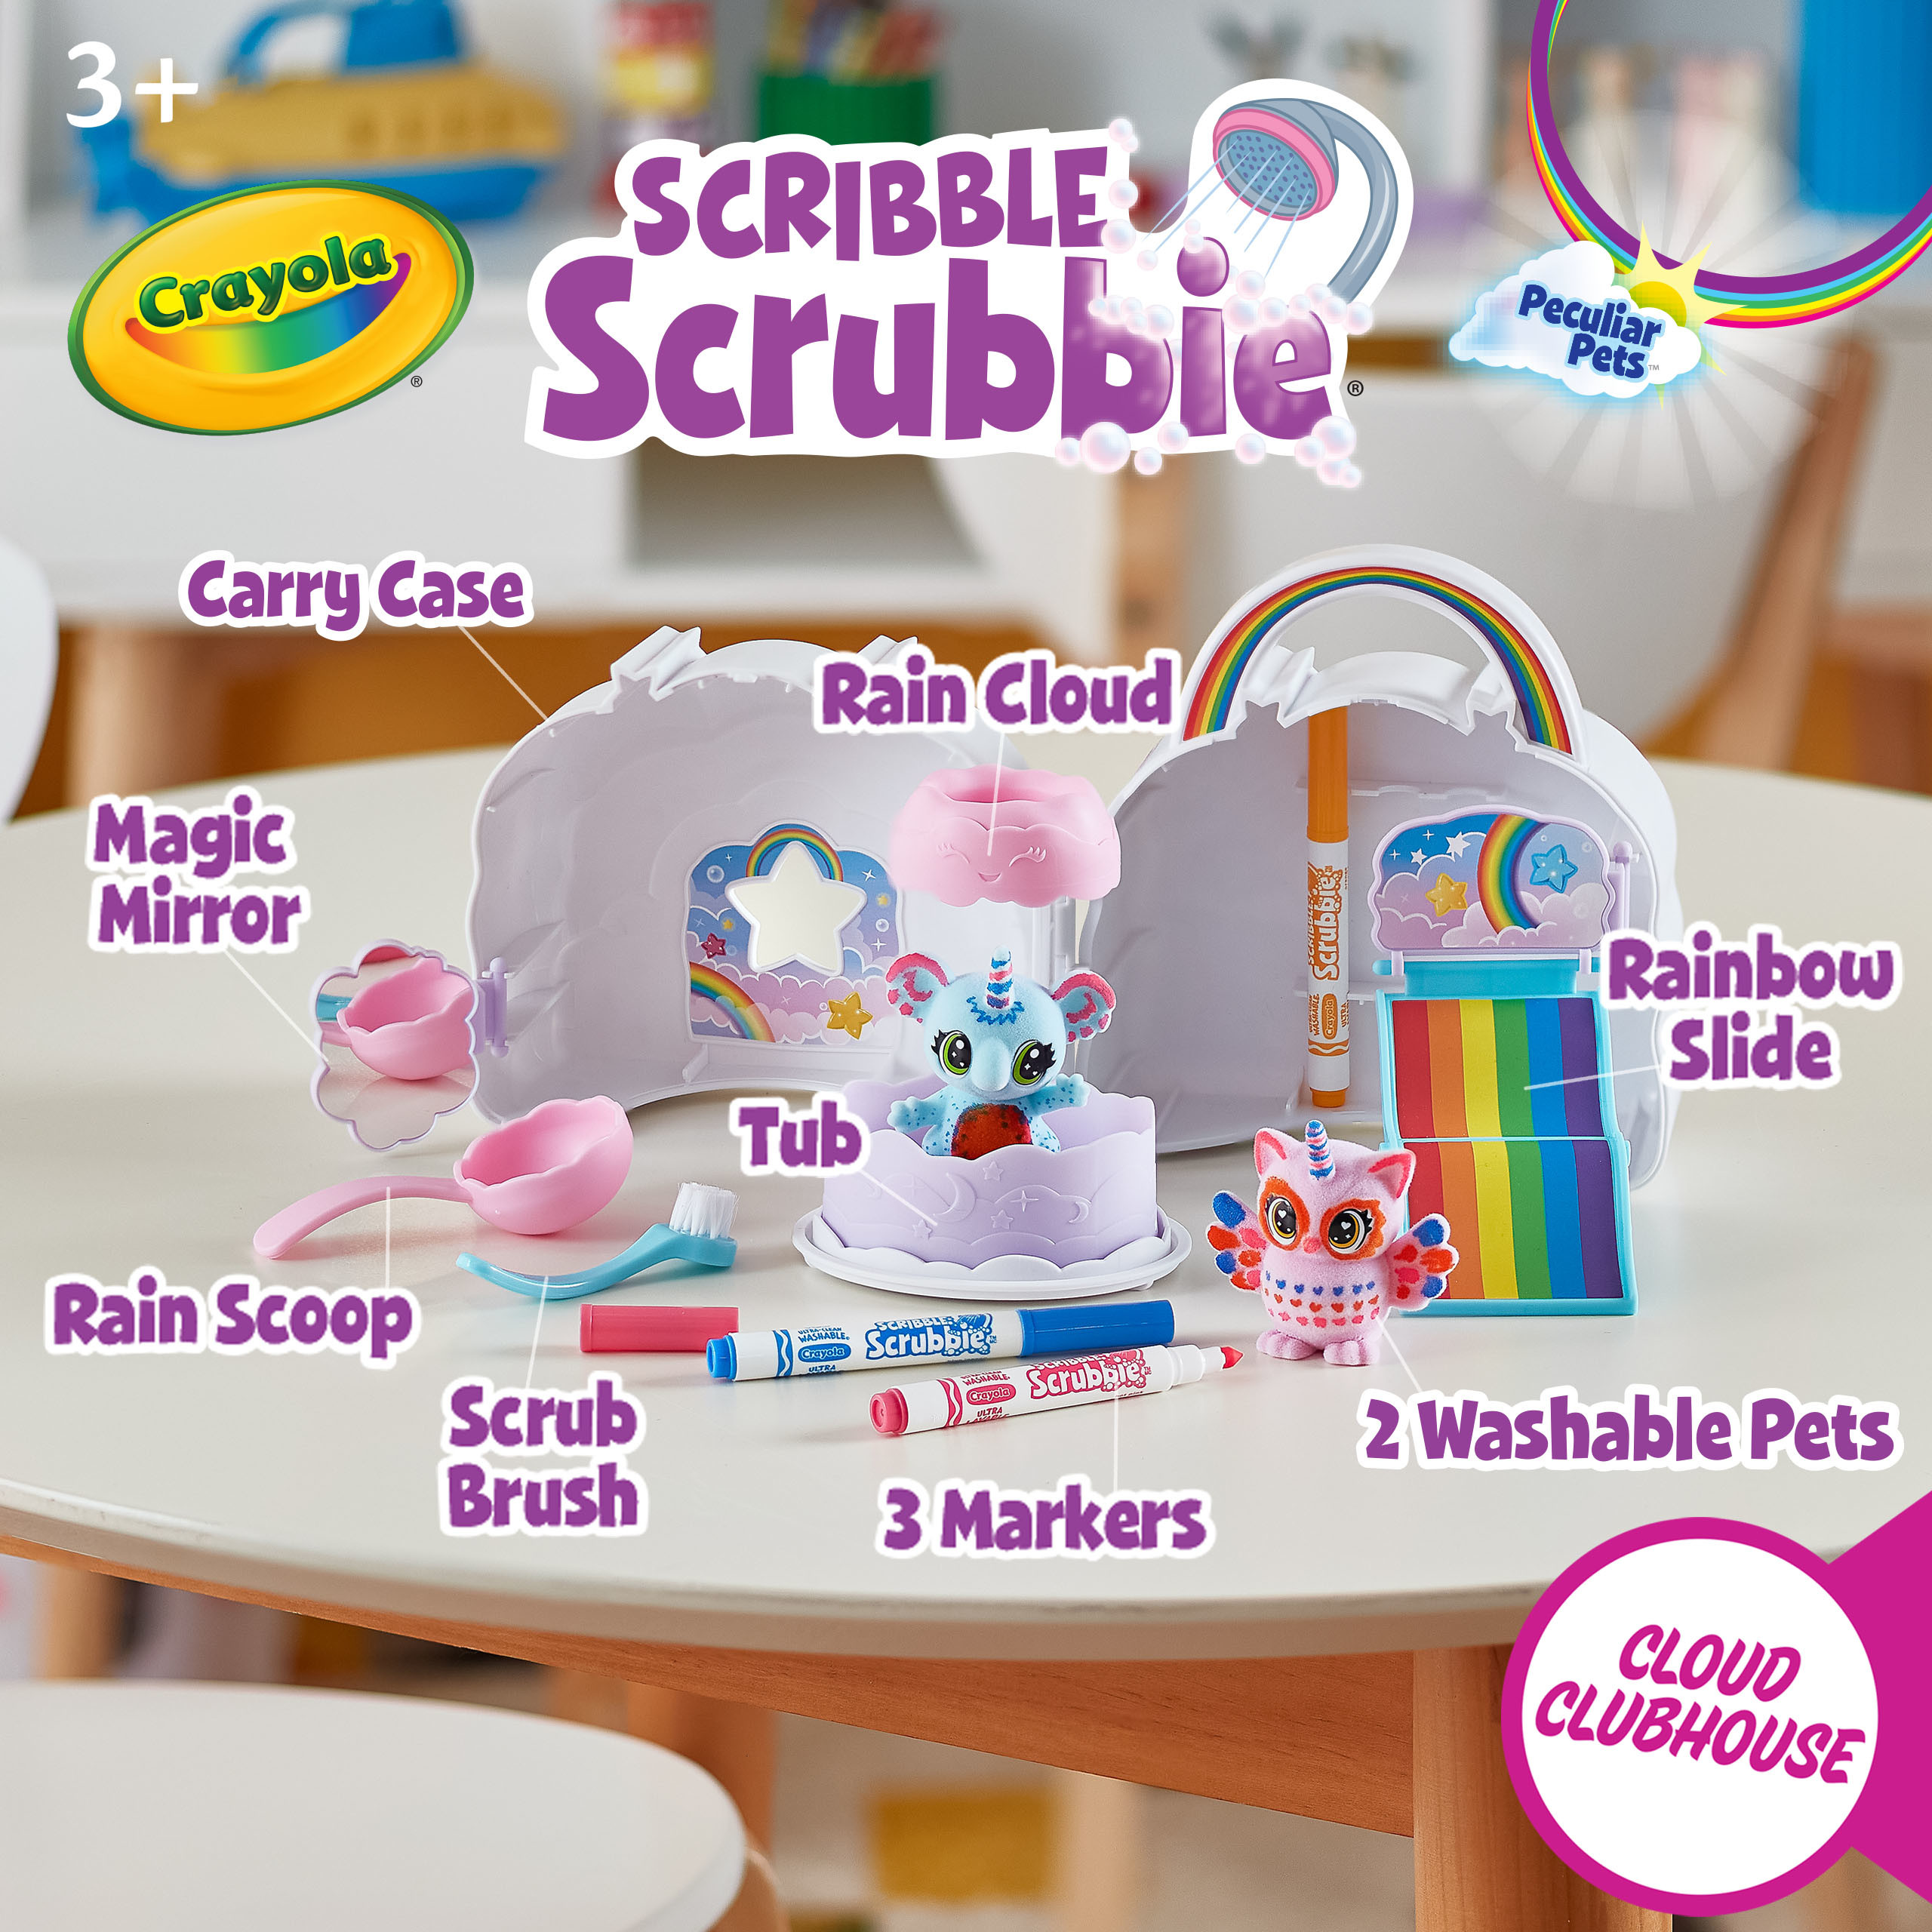 Crayola Scribble Scrubbie Cloud Clubhouse, Coloring Toys, Gifts, Beginner Unisex Child, 8 Pcs - image 3 of 10